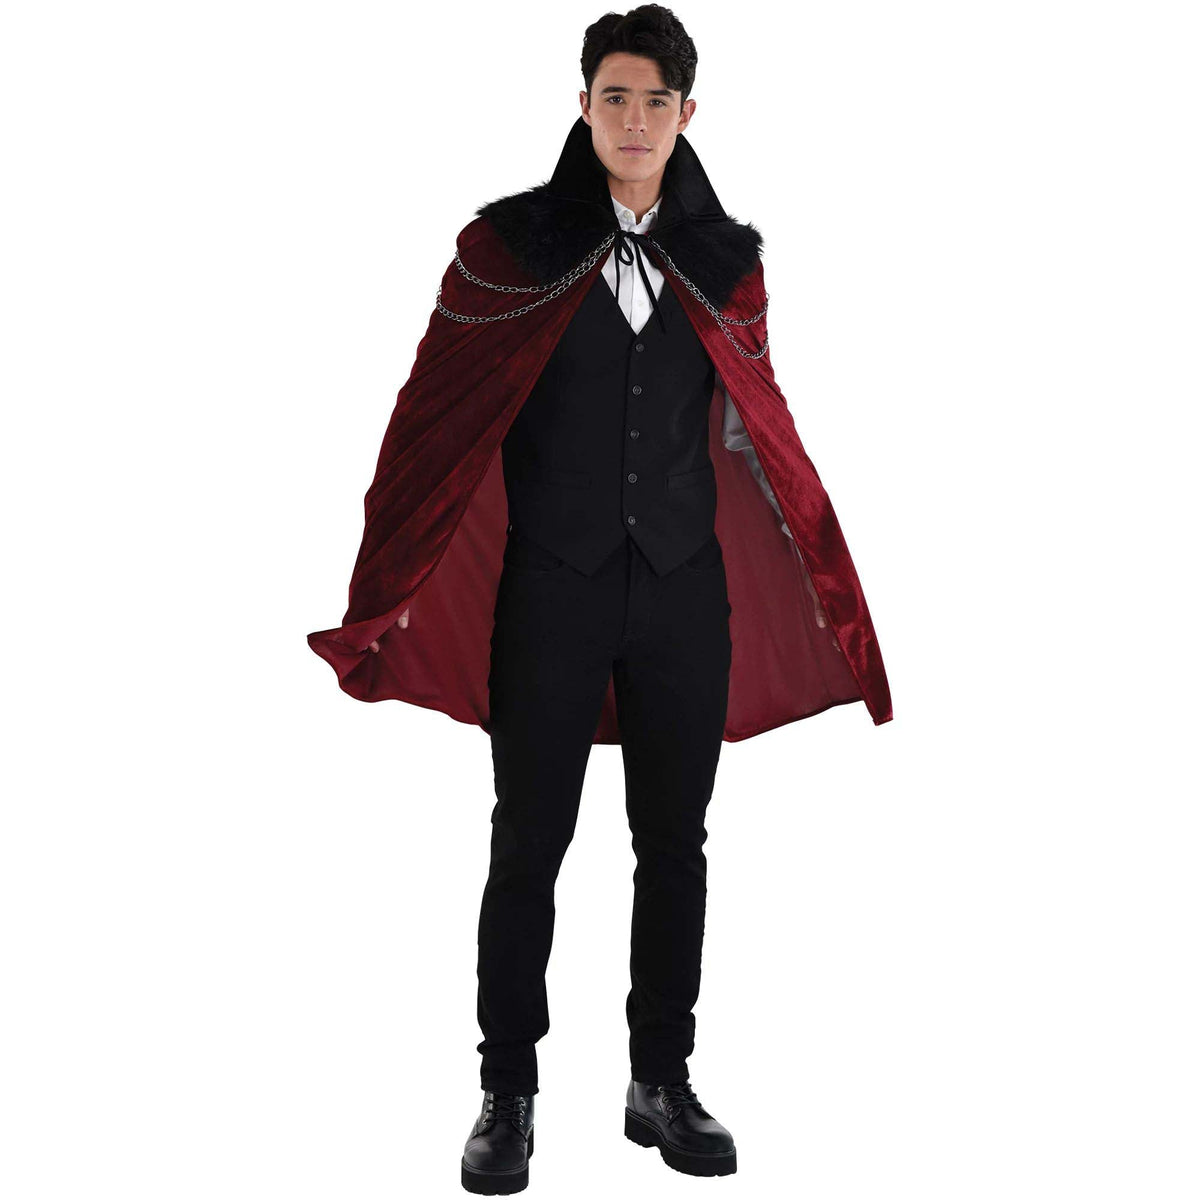 HALLOWEEN COSTUME CO. Costume Accessories Gothic Vampire Cloak for Adults, Black and Red Cloak